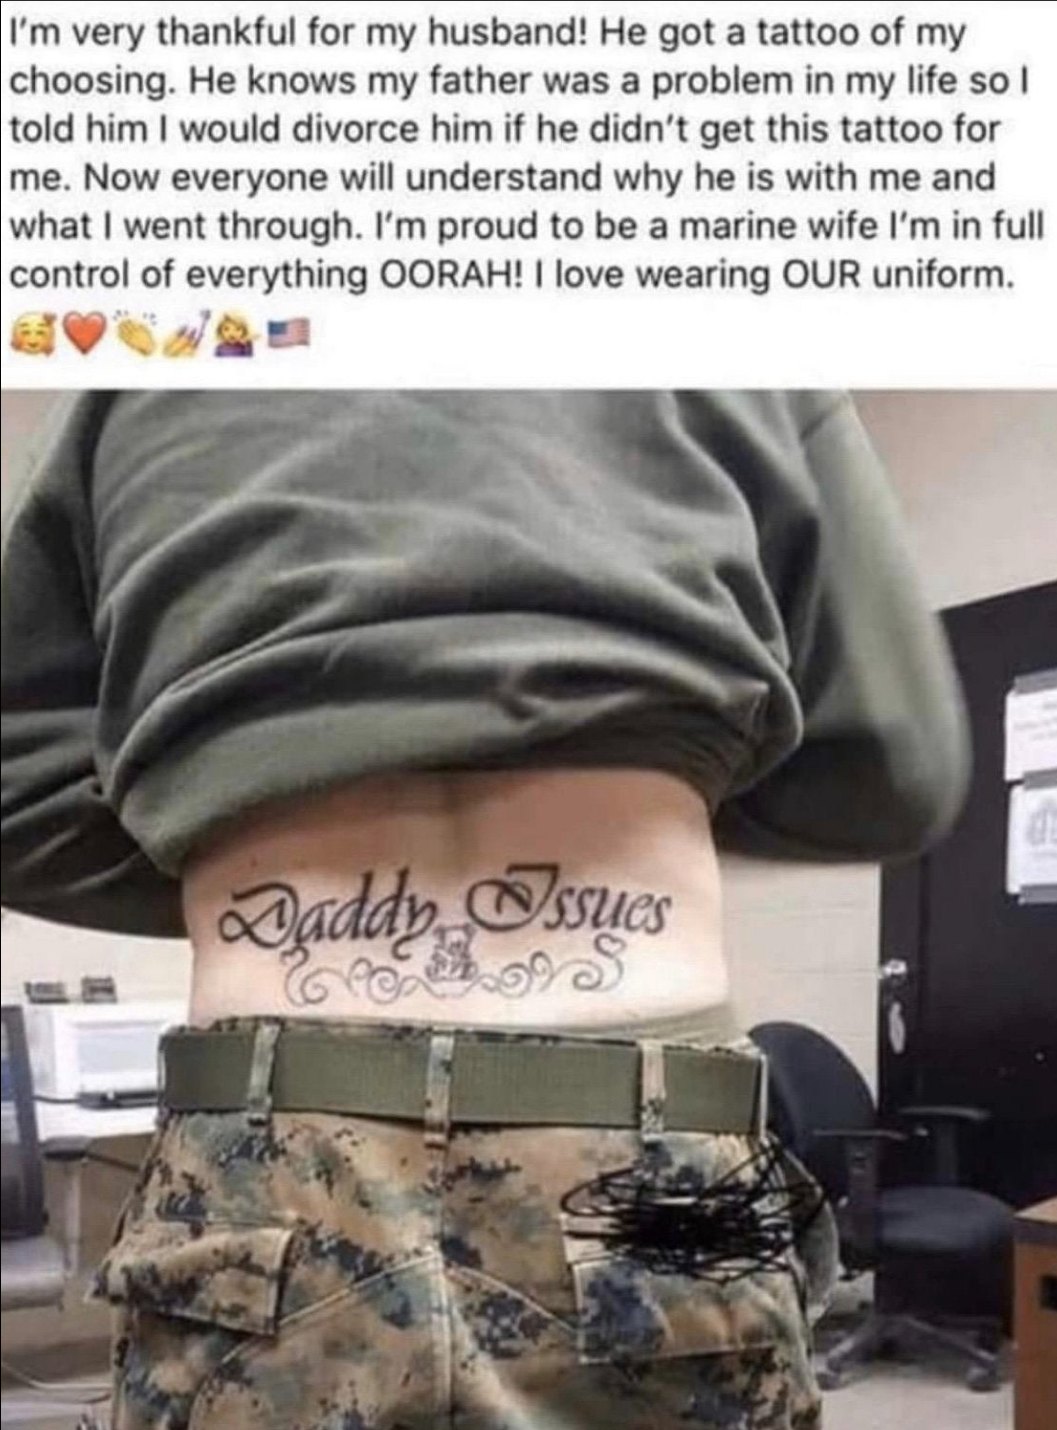 usmc 1833 tattoo - I'm very thankful for my husband! He got a tattoo of my choosing. He knows my father was a problem in my life so I told him I would divorce him if he didn't get this tattoo for me. Now everyone will understand why he is with me and what